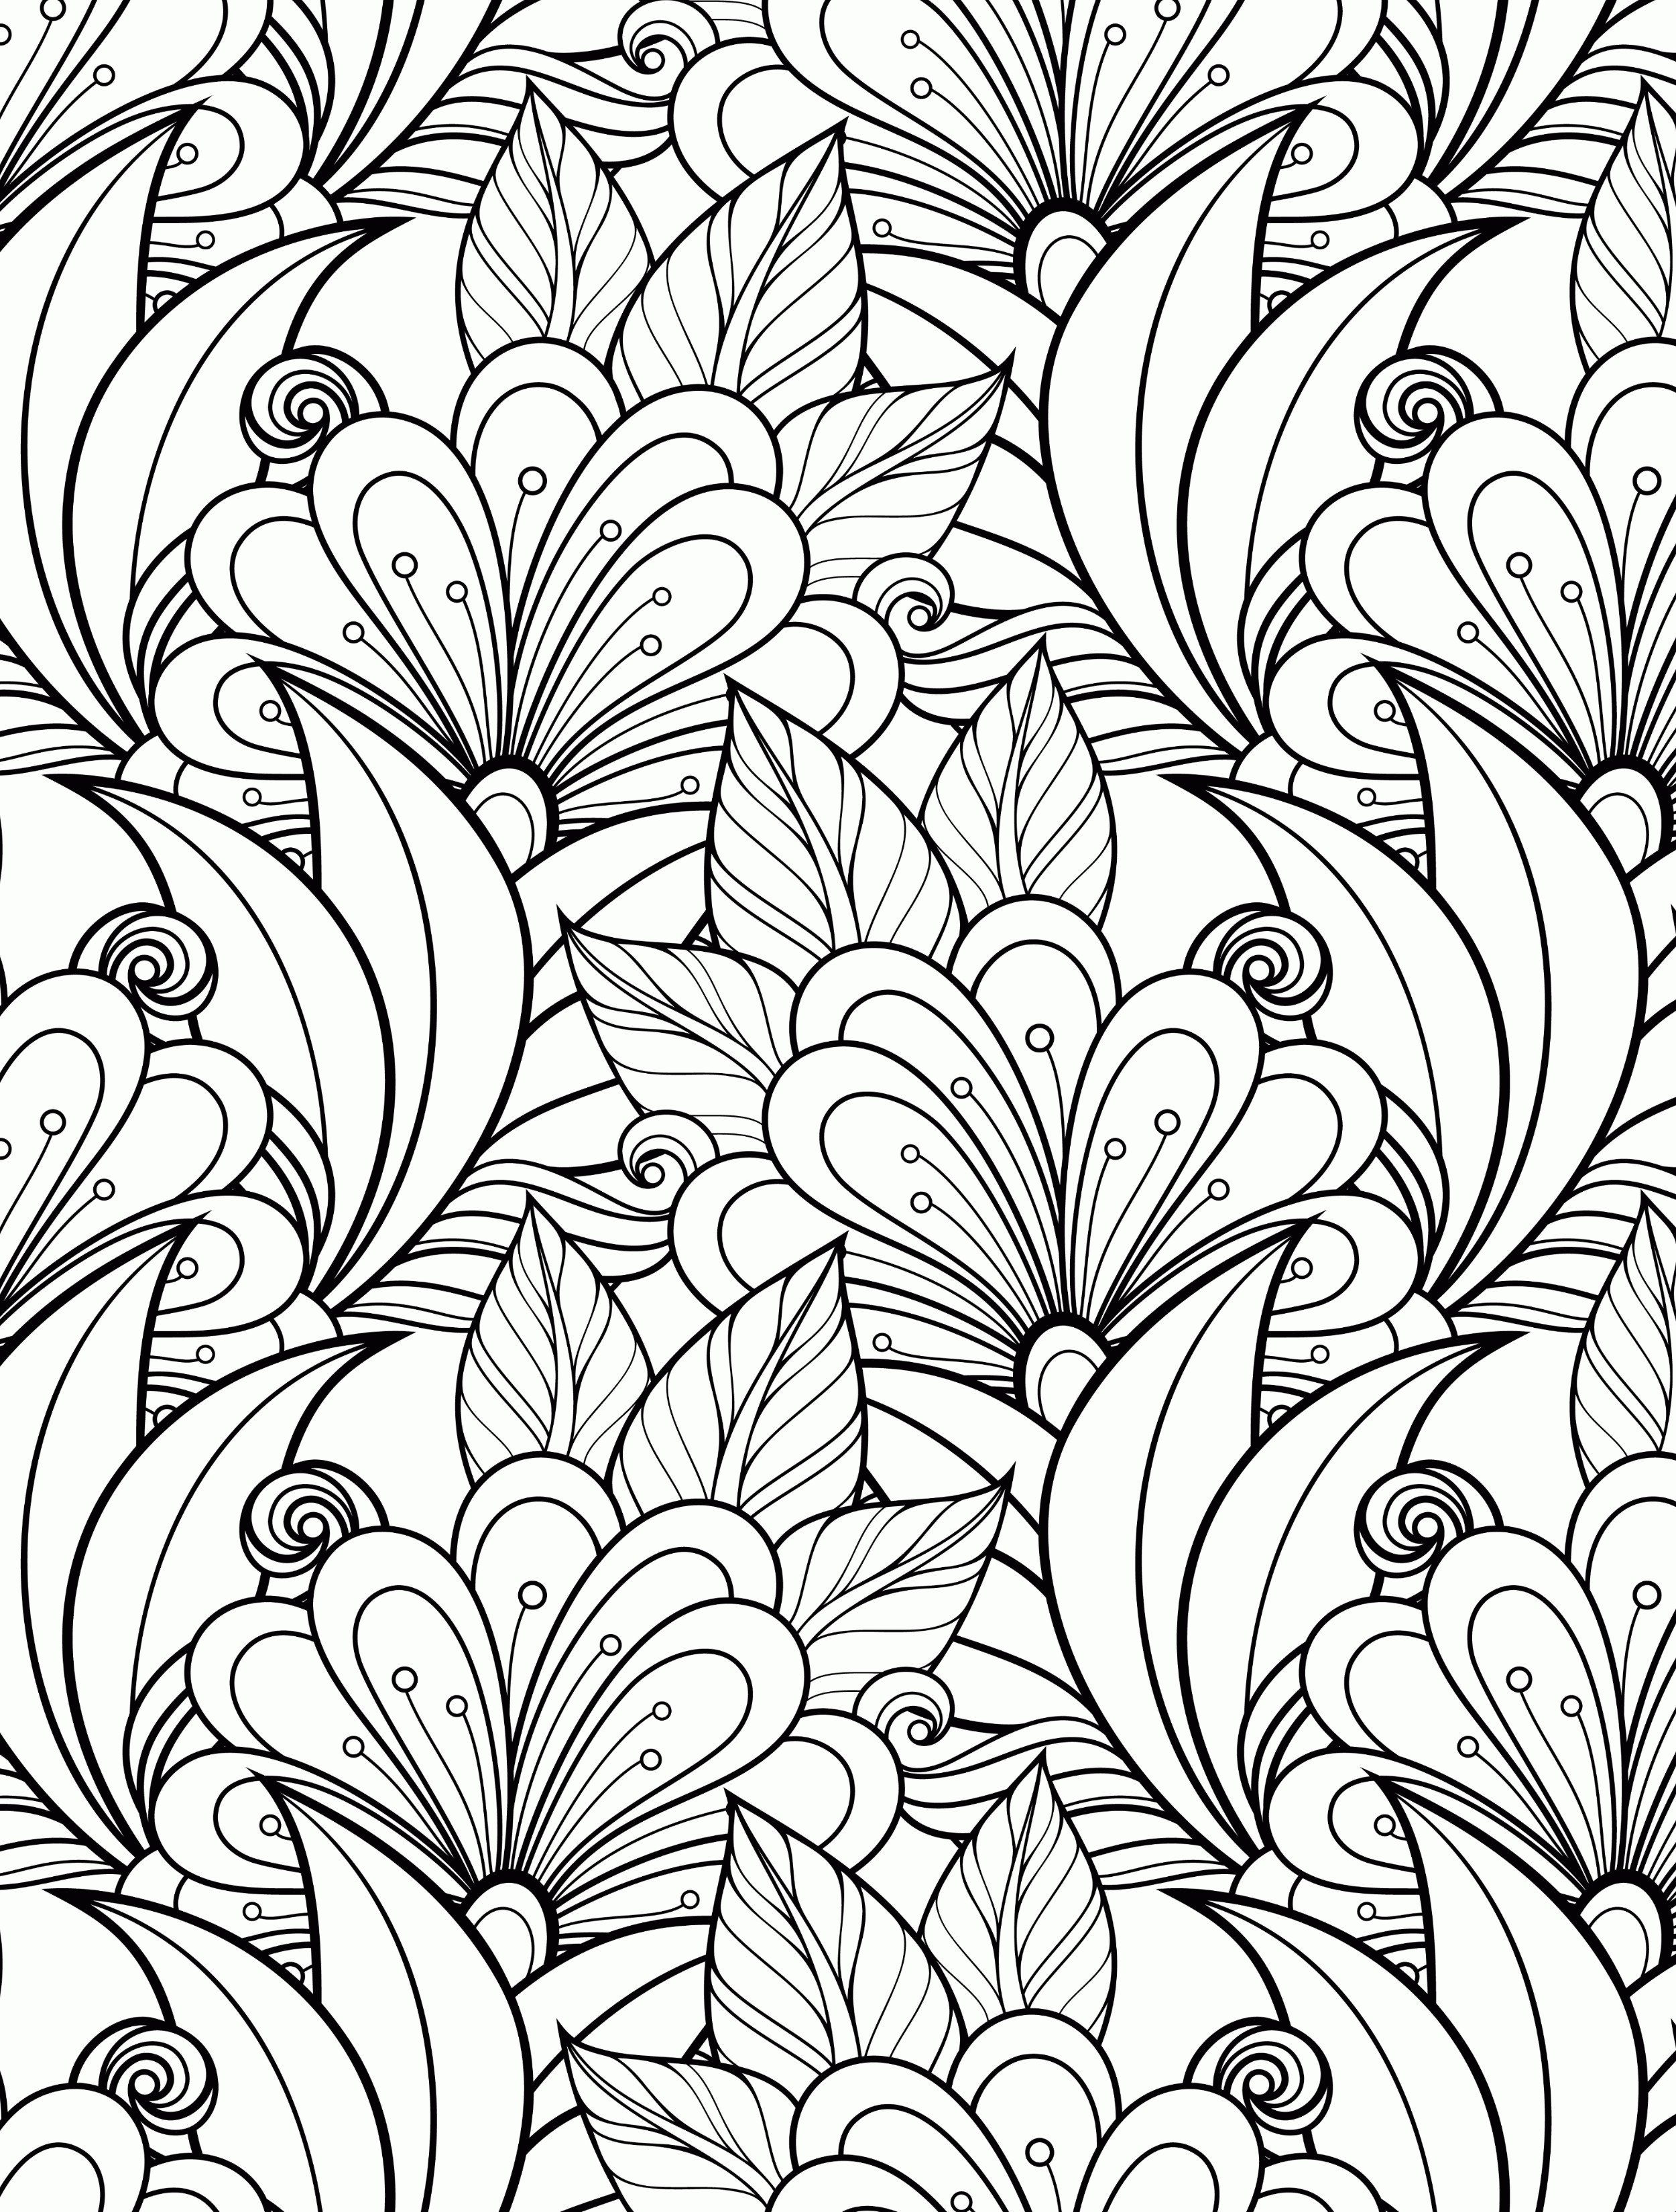 Printable Coloring Pages Adults Free
 Download Free Printable Coloring Pages For Adults